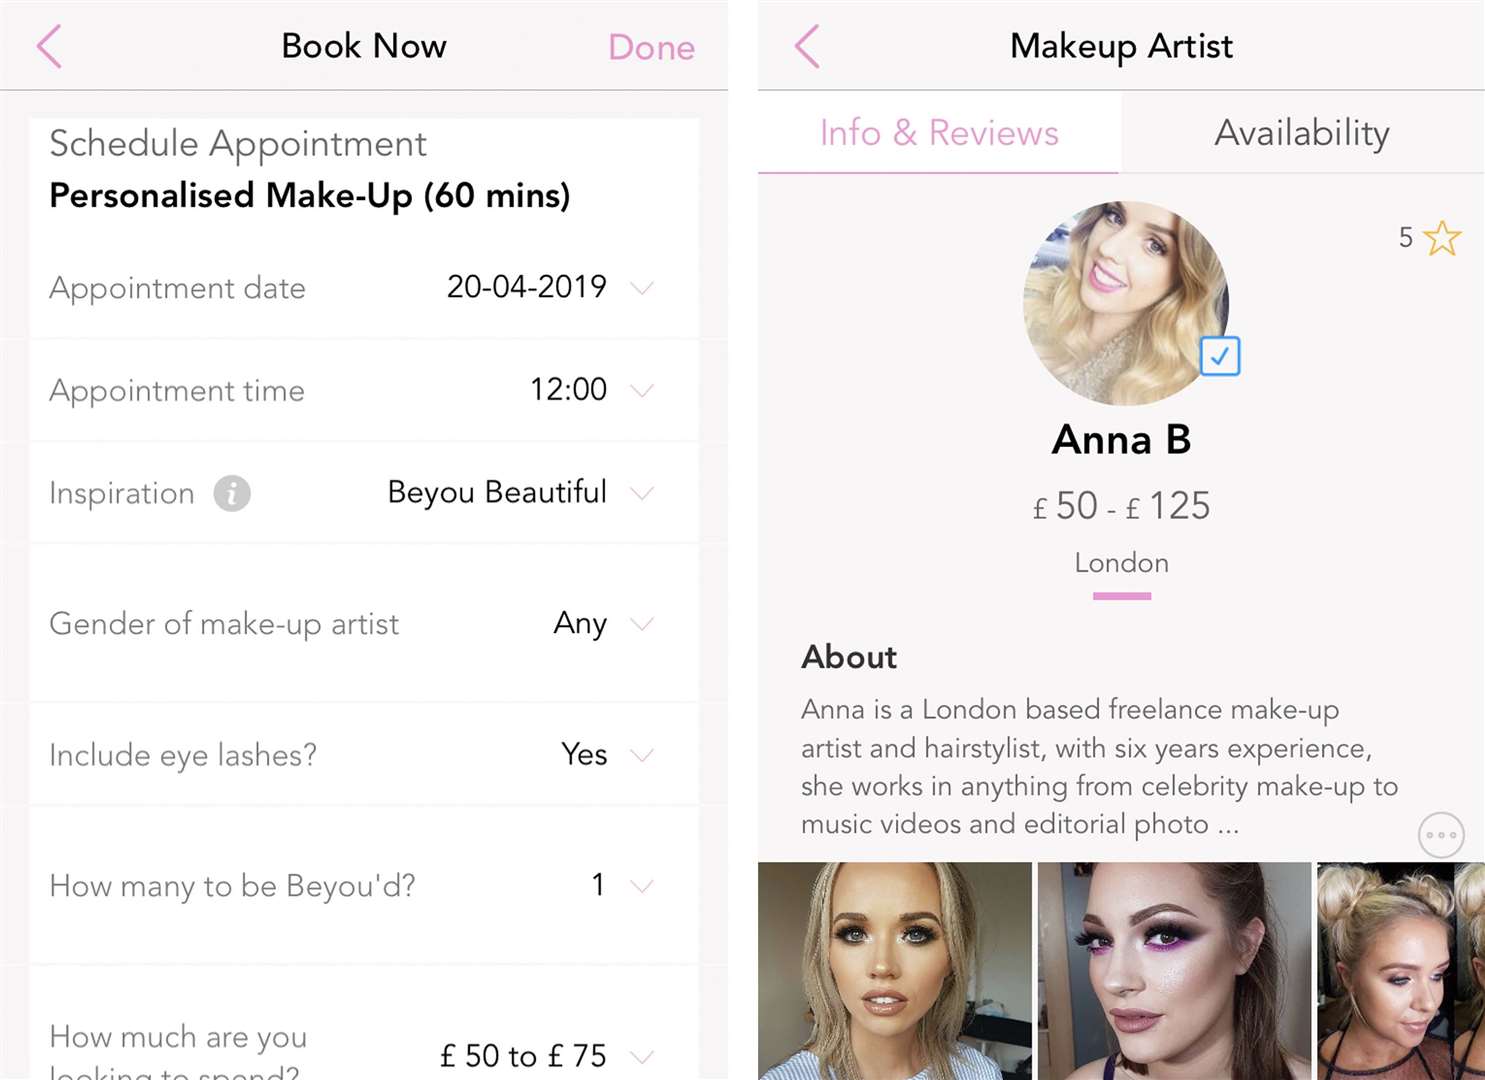 The online booking process for Beyou